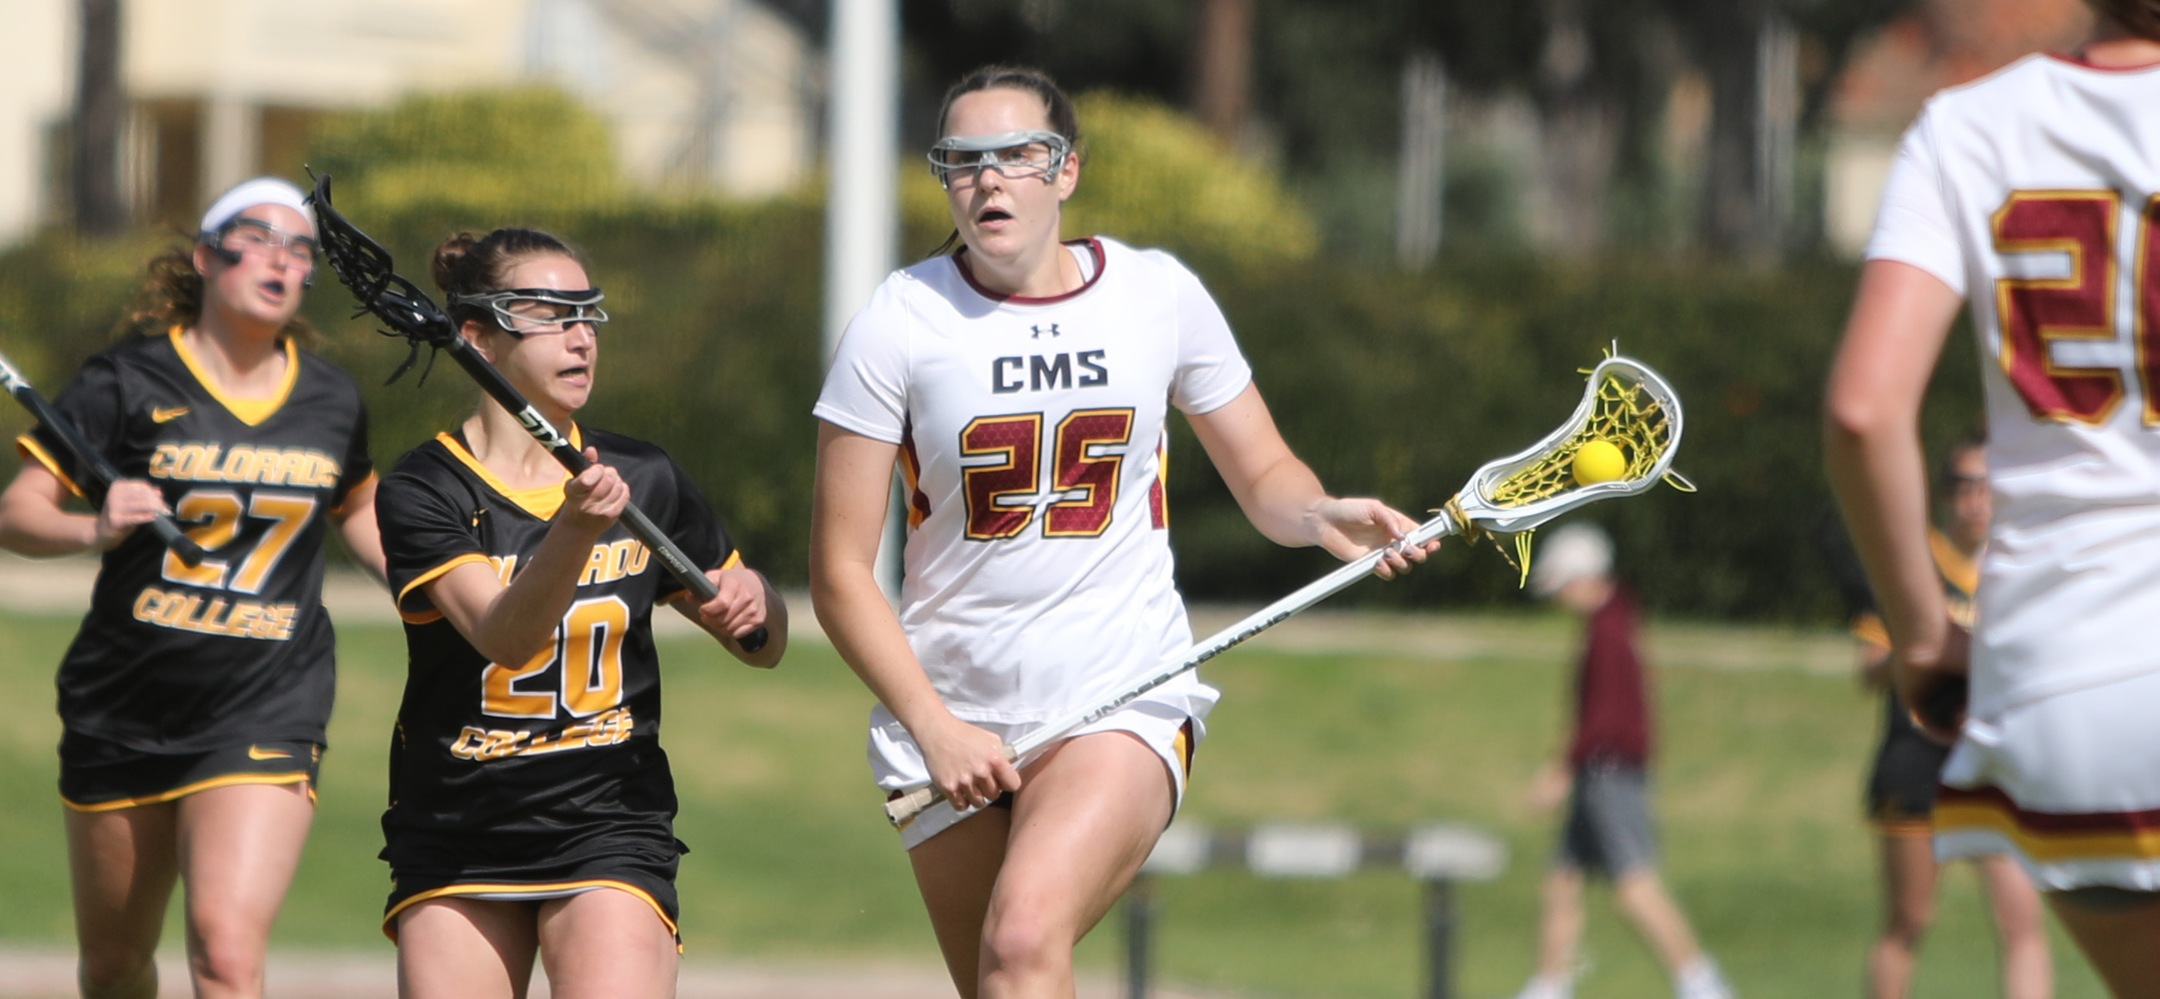 Sally Abel had four goals and an assist to key an 18-9 road win at Redlands